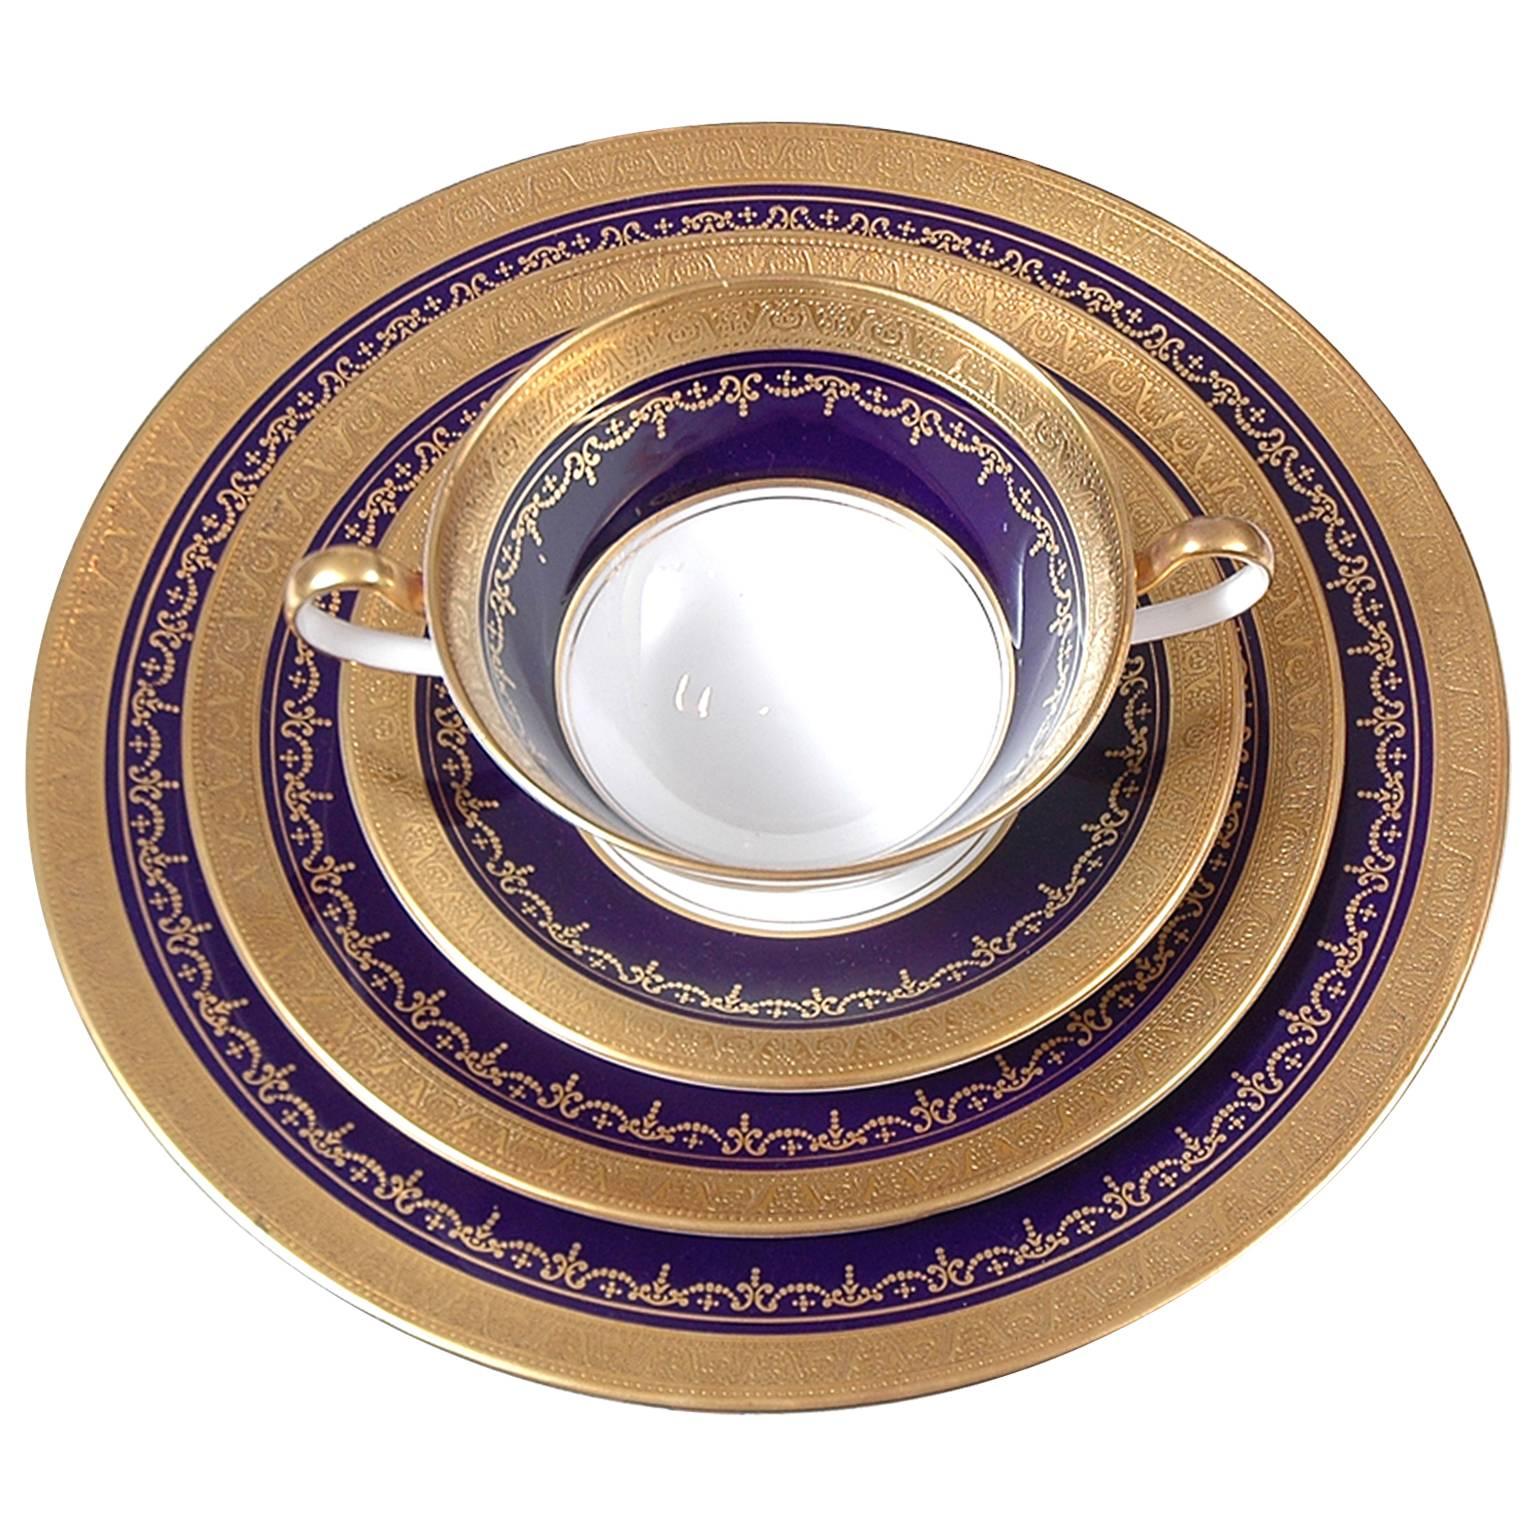 Ansley China, Georgian Cobalt Pattern with Encrusted Gold, Service for 16